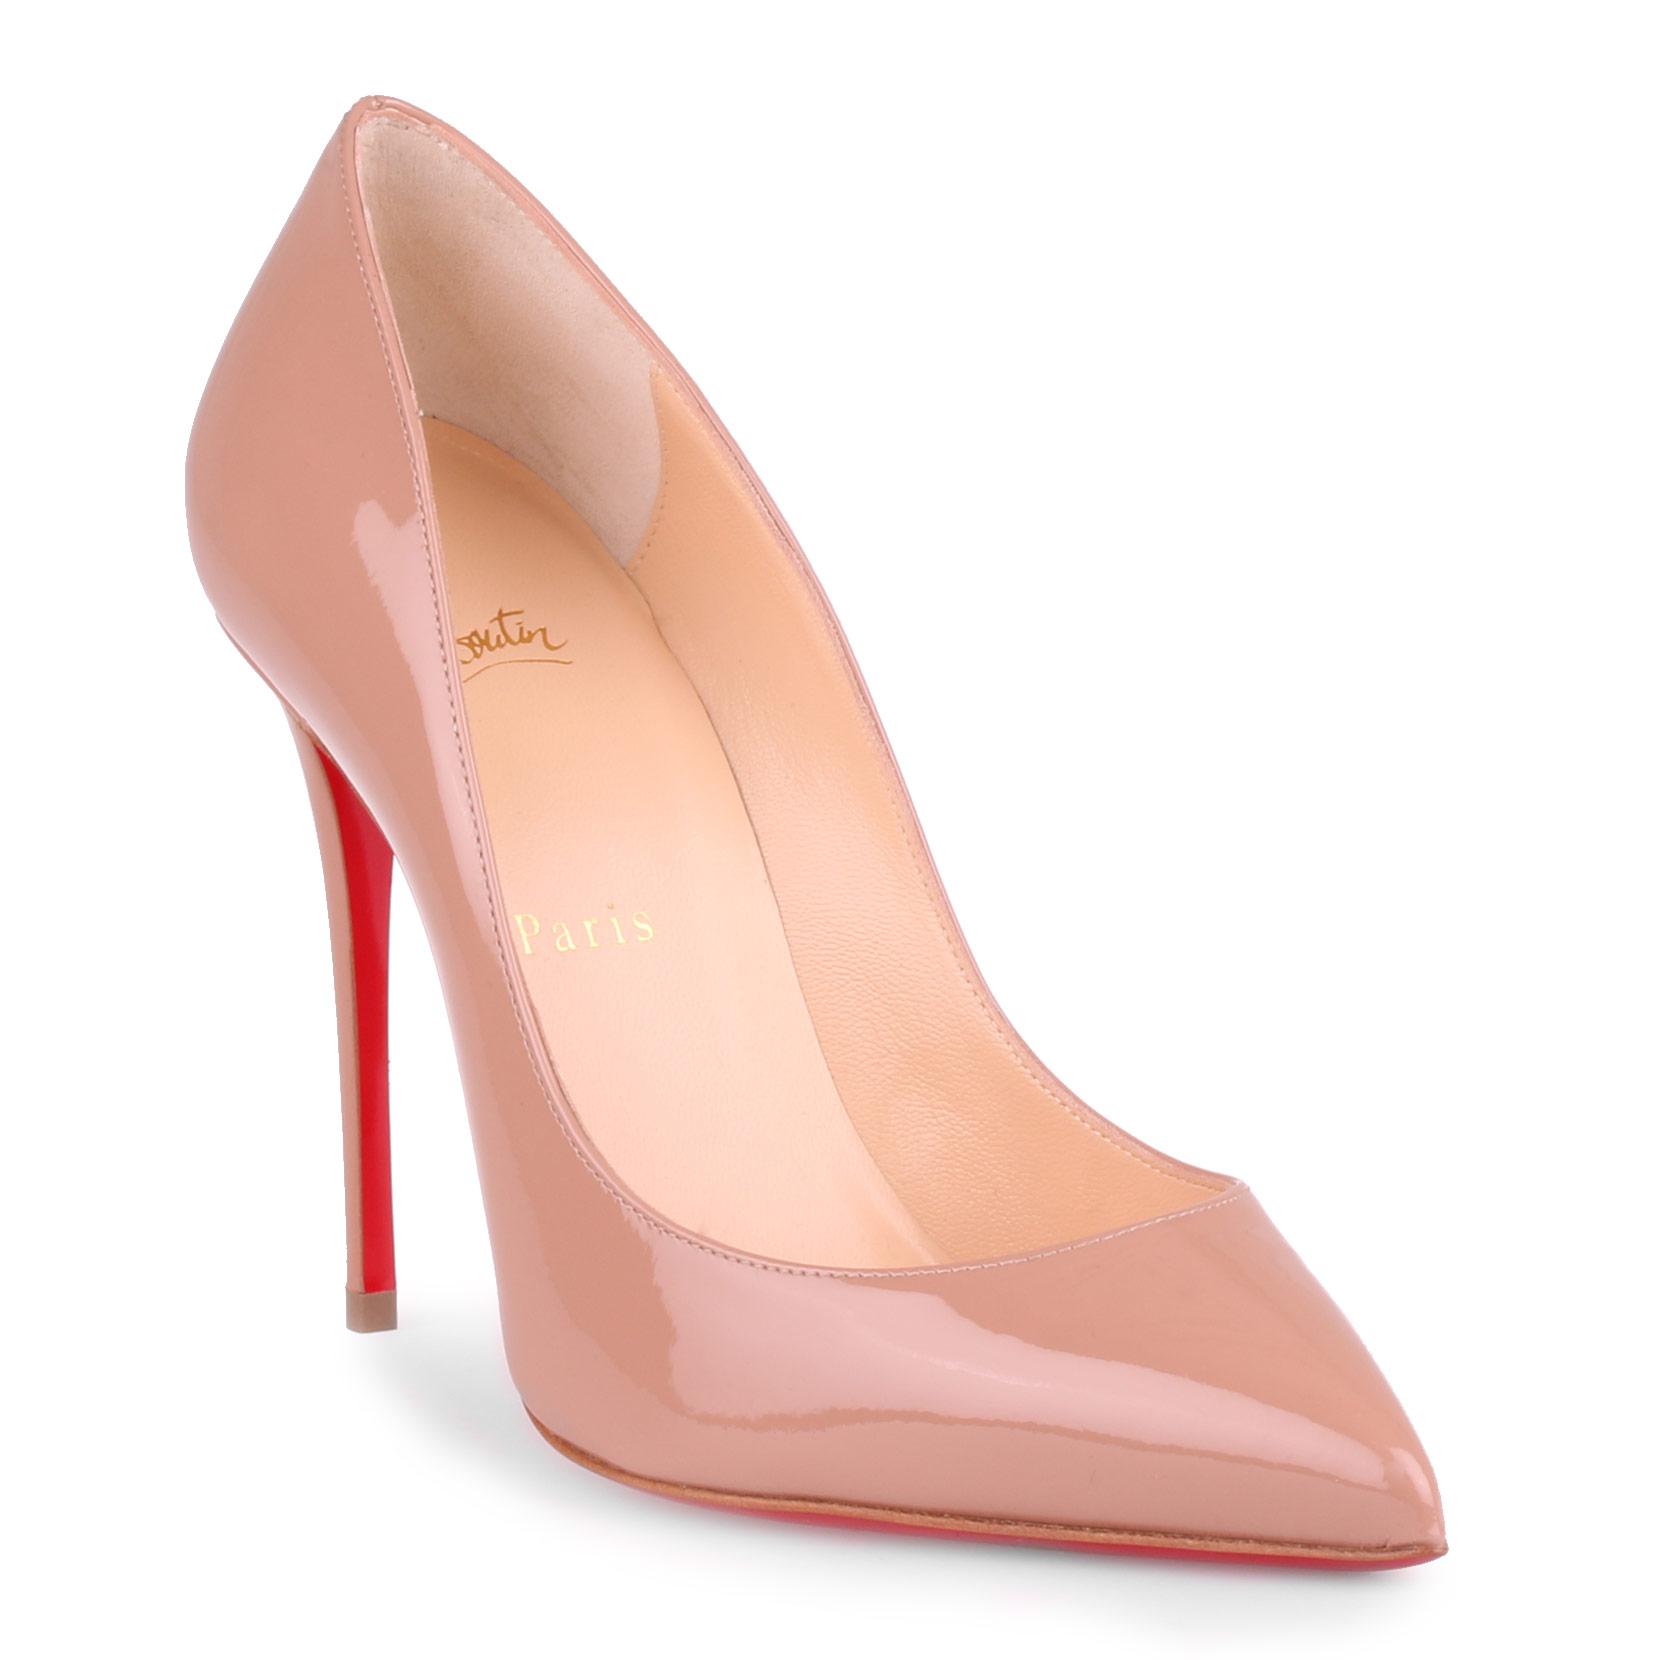 Lyst - Christian Louboutin Pigalle Follies 100 Beige Patent Leather Pump